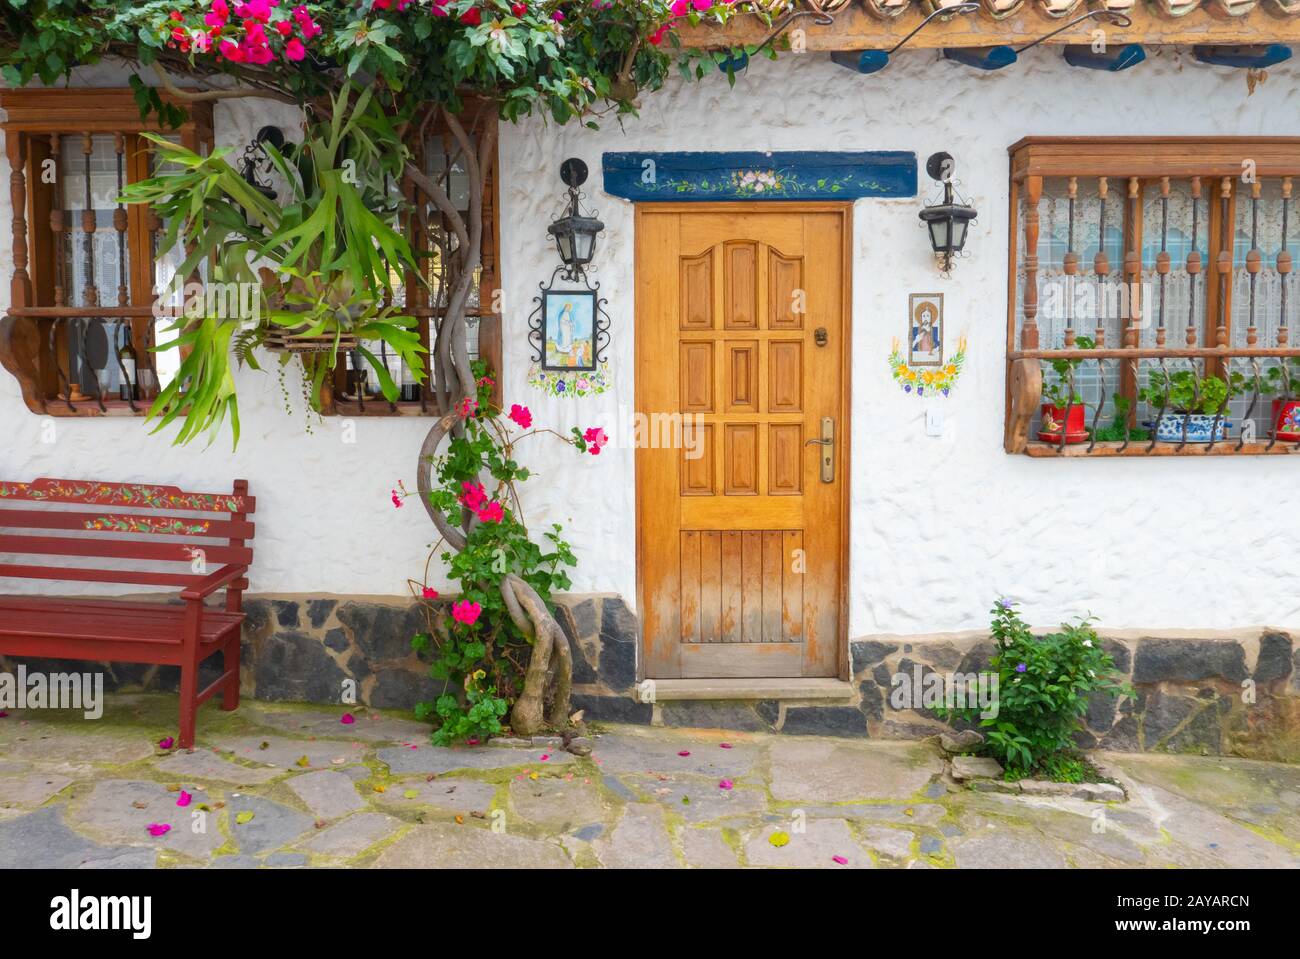 Tenza typical colonial house exterior view Stock Photo